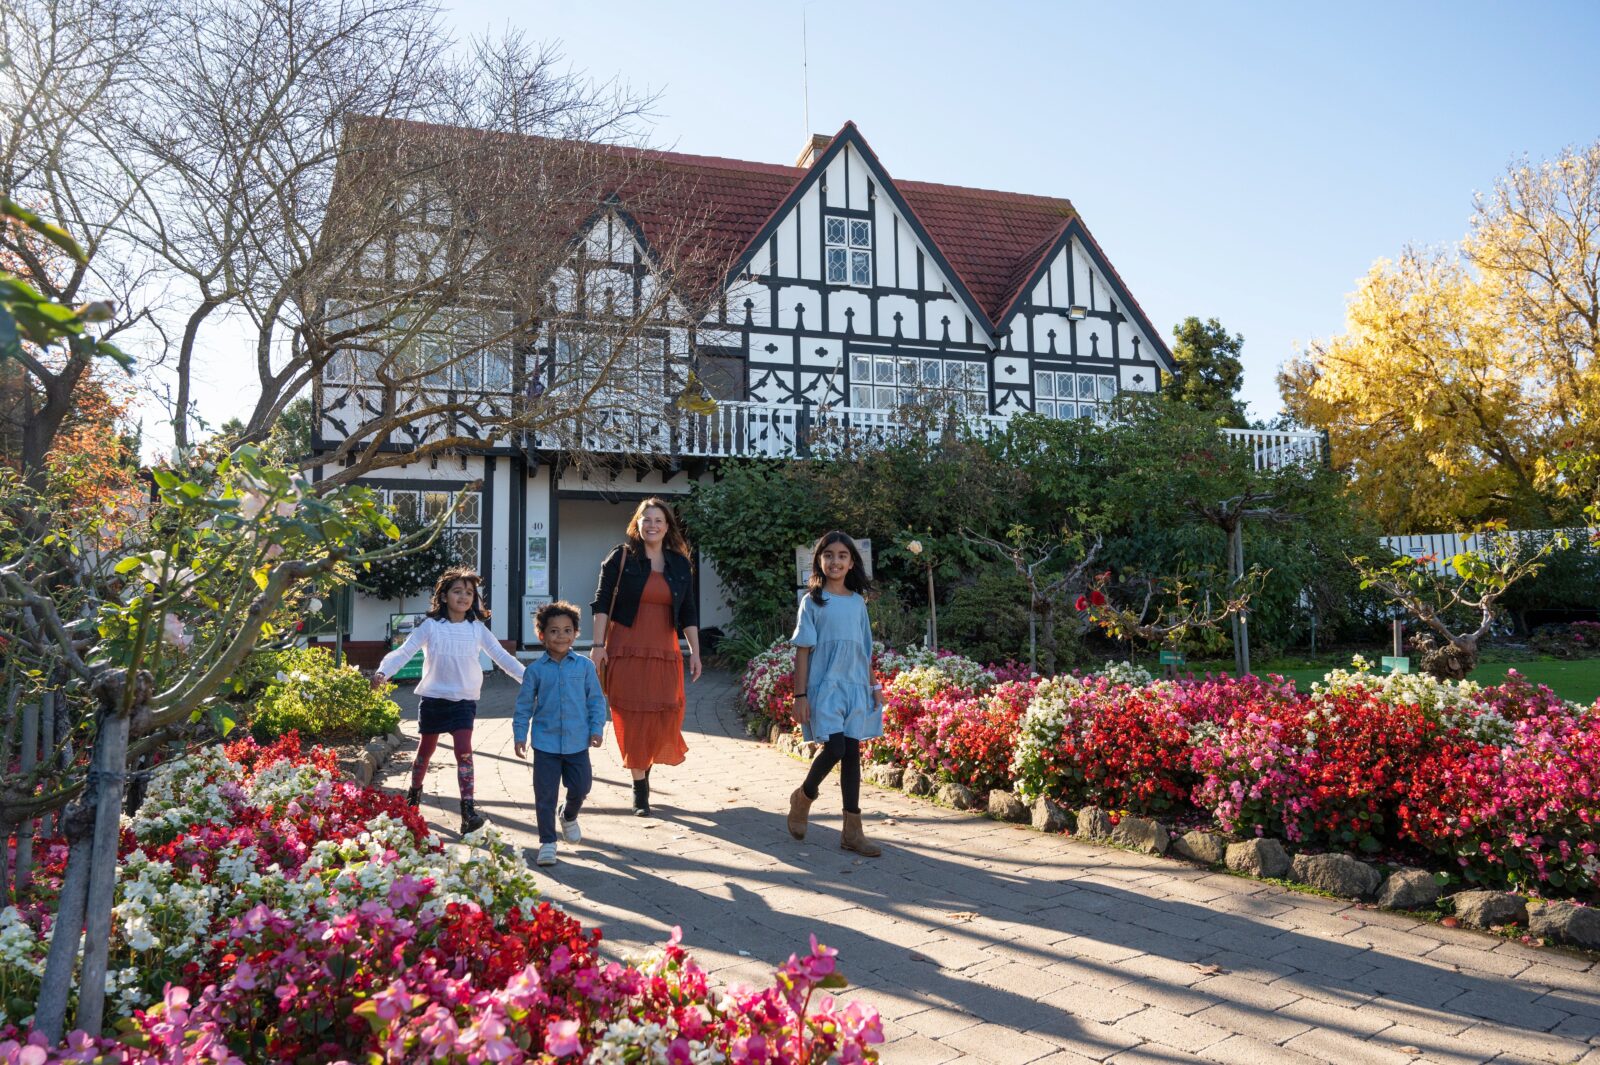 Family walks in front of a Tudor style architecture buidling